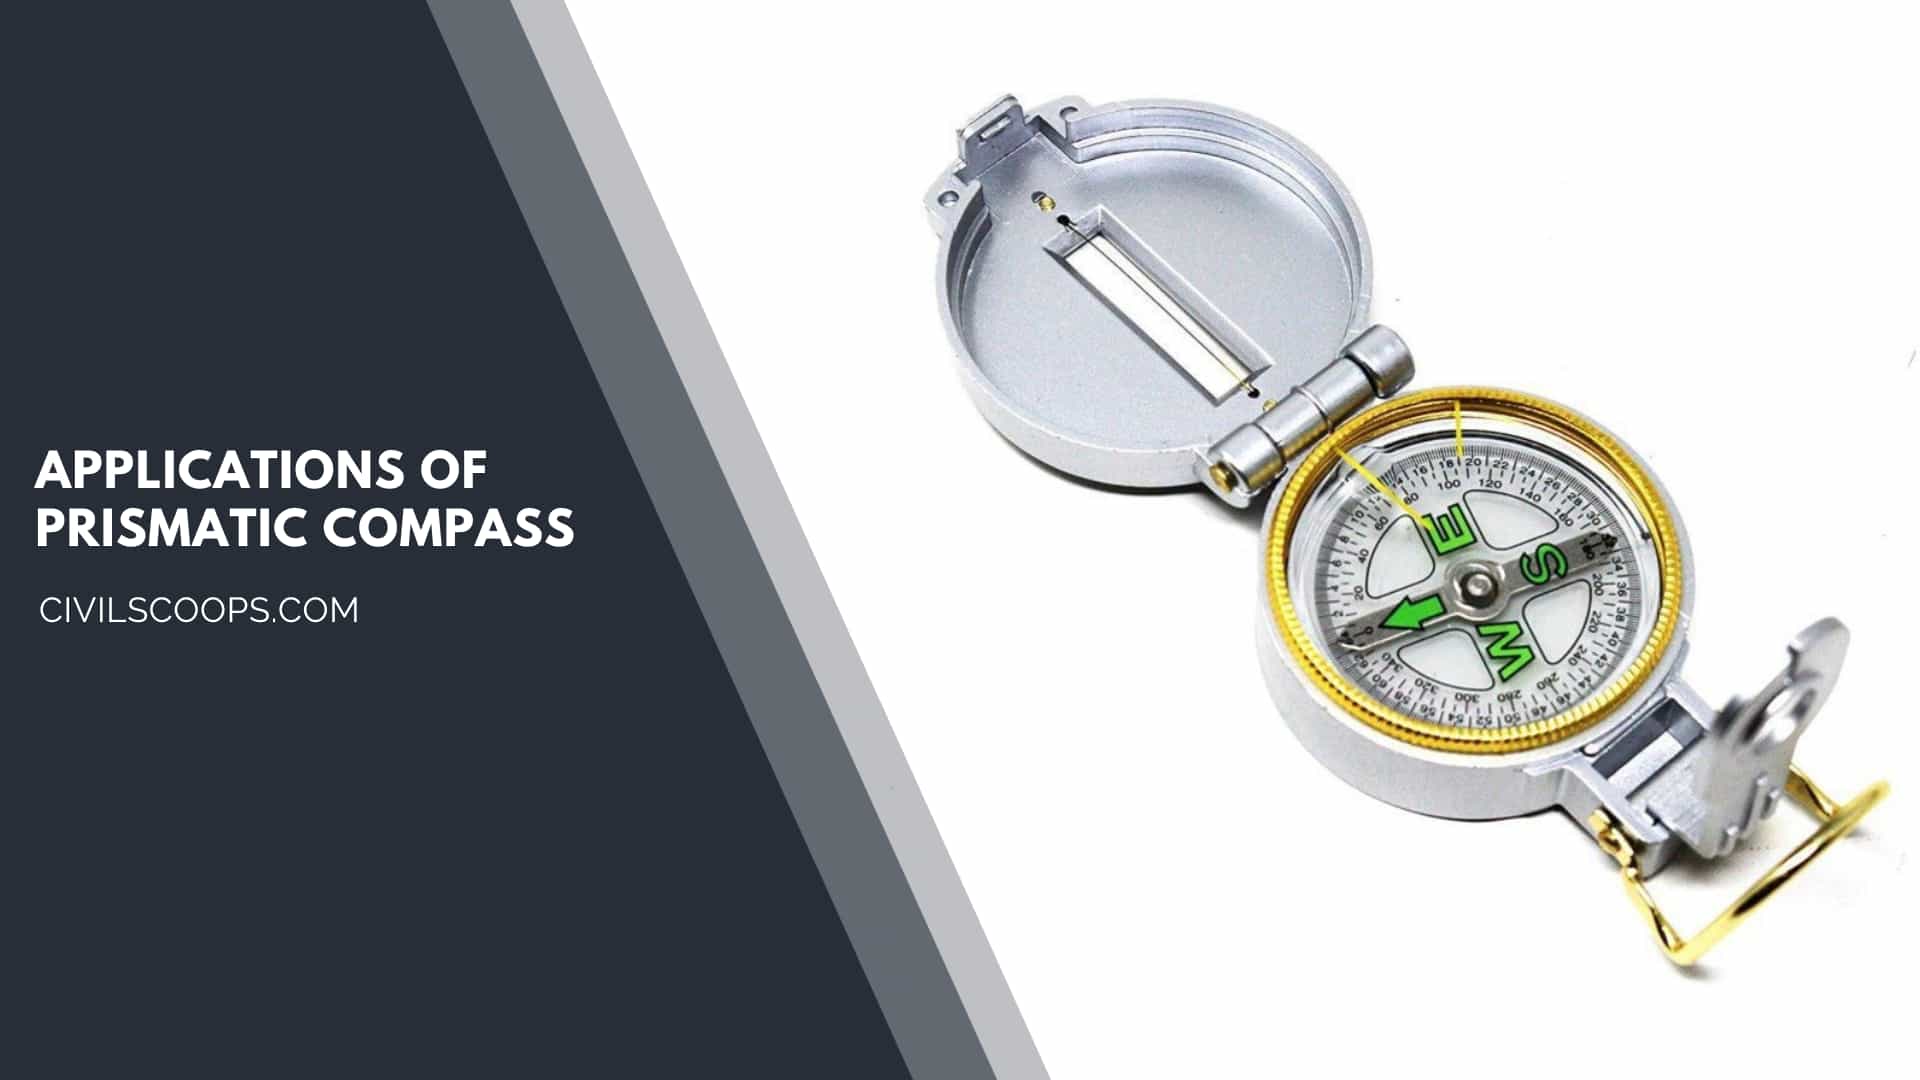 Applications of Prismatic Compass